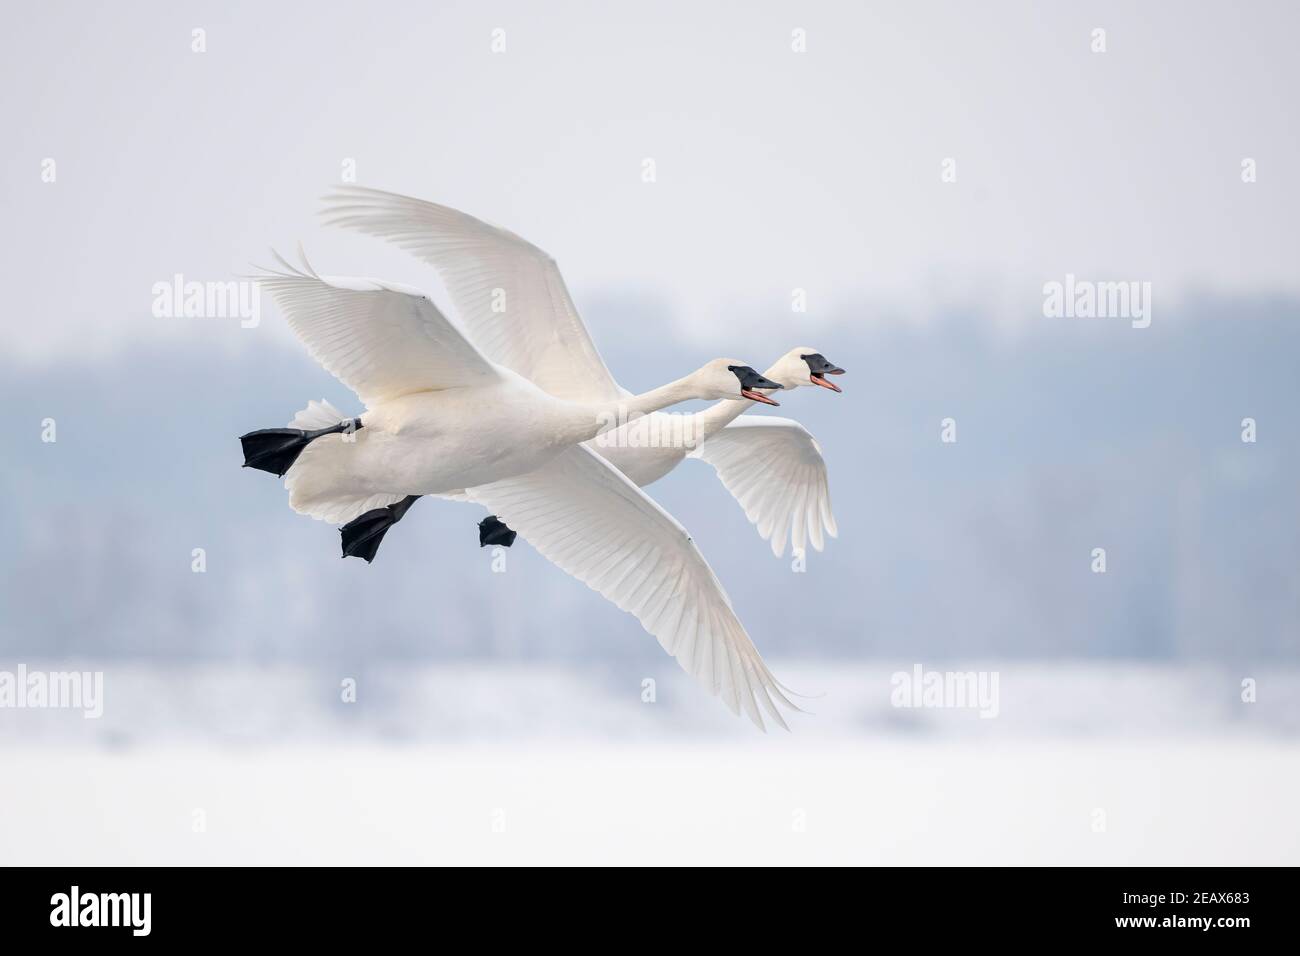 Pair of Trumpeter swans (Cygnus buccinator) landing on St. Croix River, WI, USA, by Dominique Braud/Dembinsky Photo Assoc Stock Photo